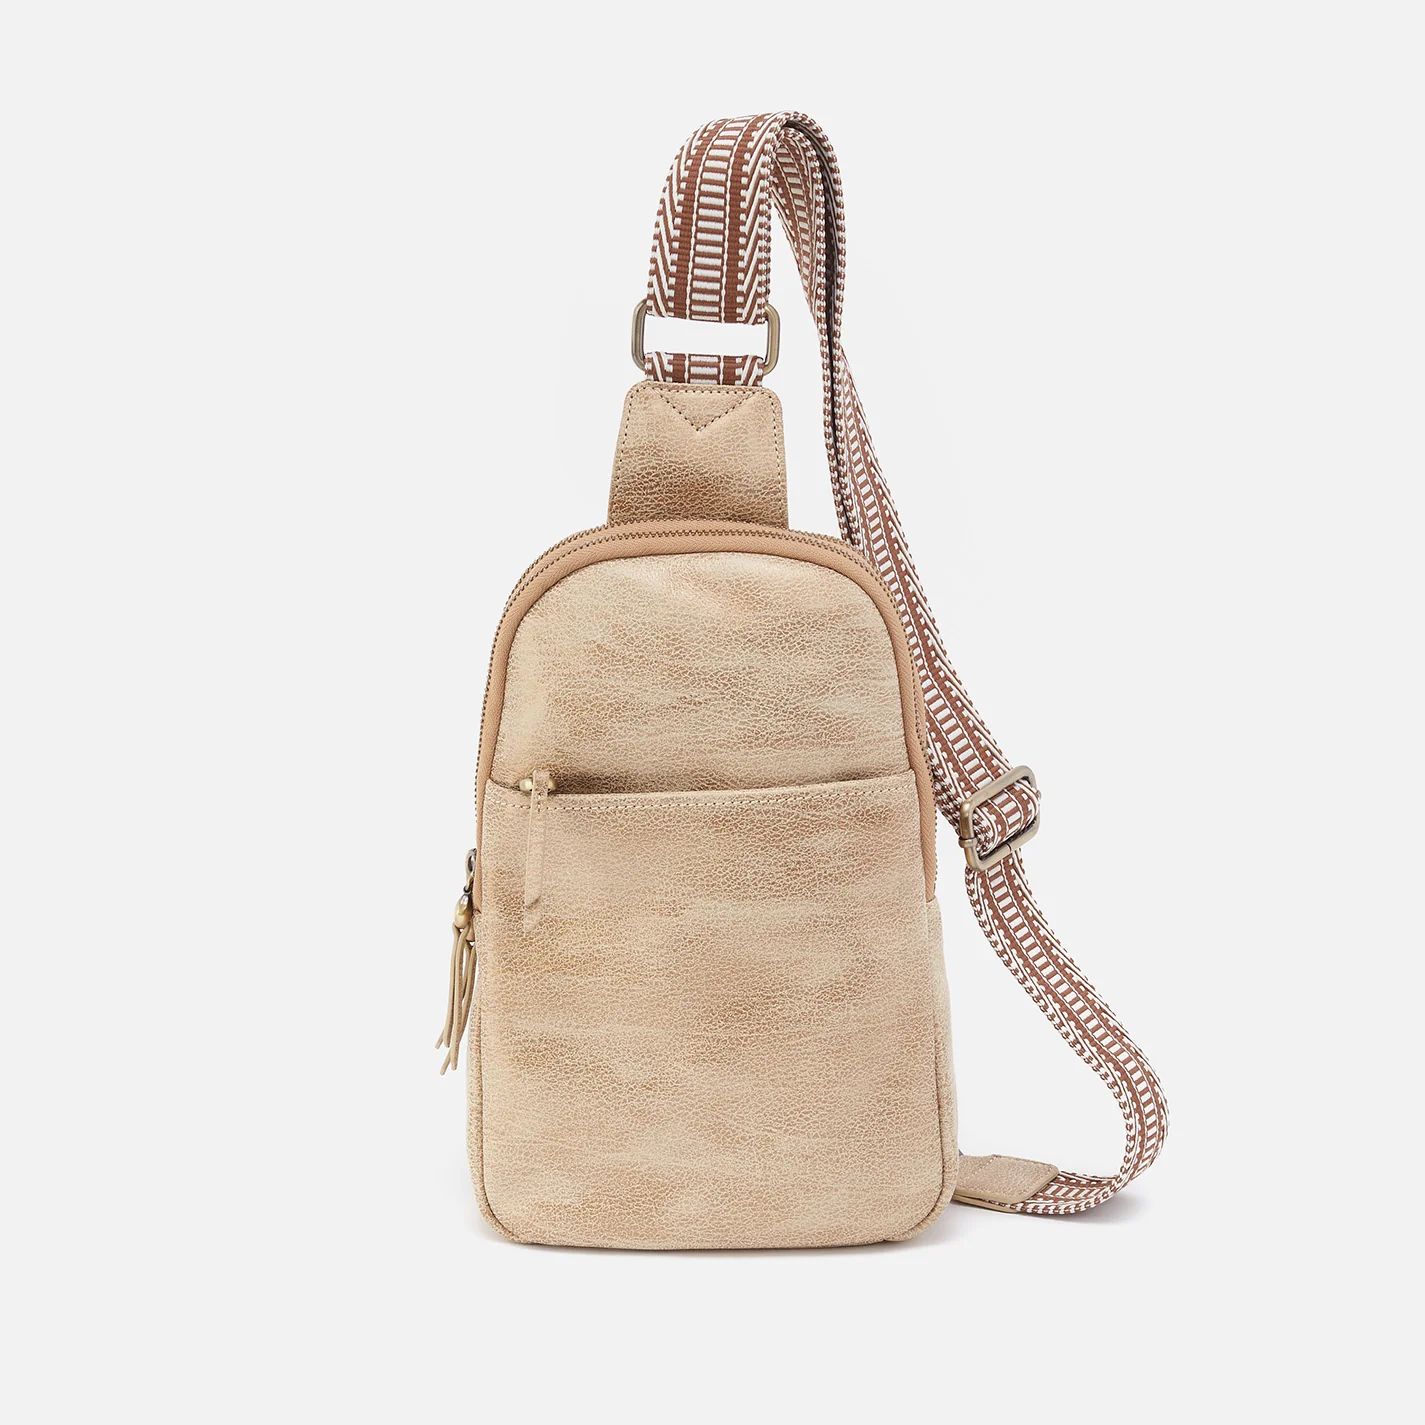 Cass Sling in Metallic Leather - Gold Leaf | HOBO Bags